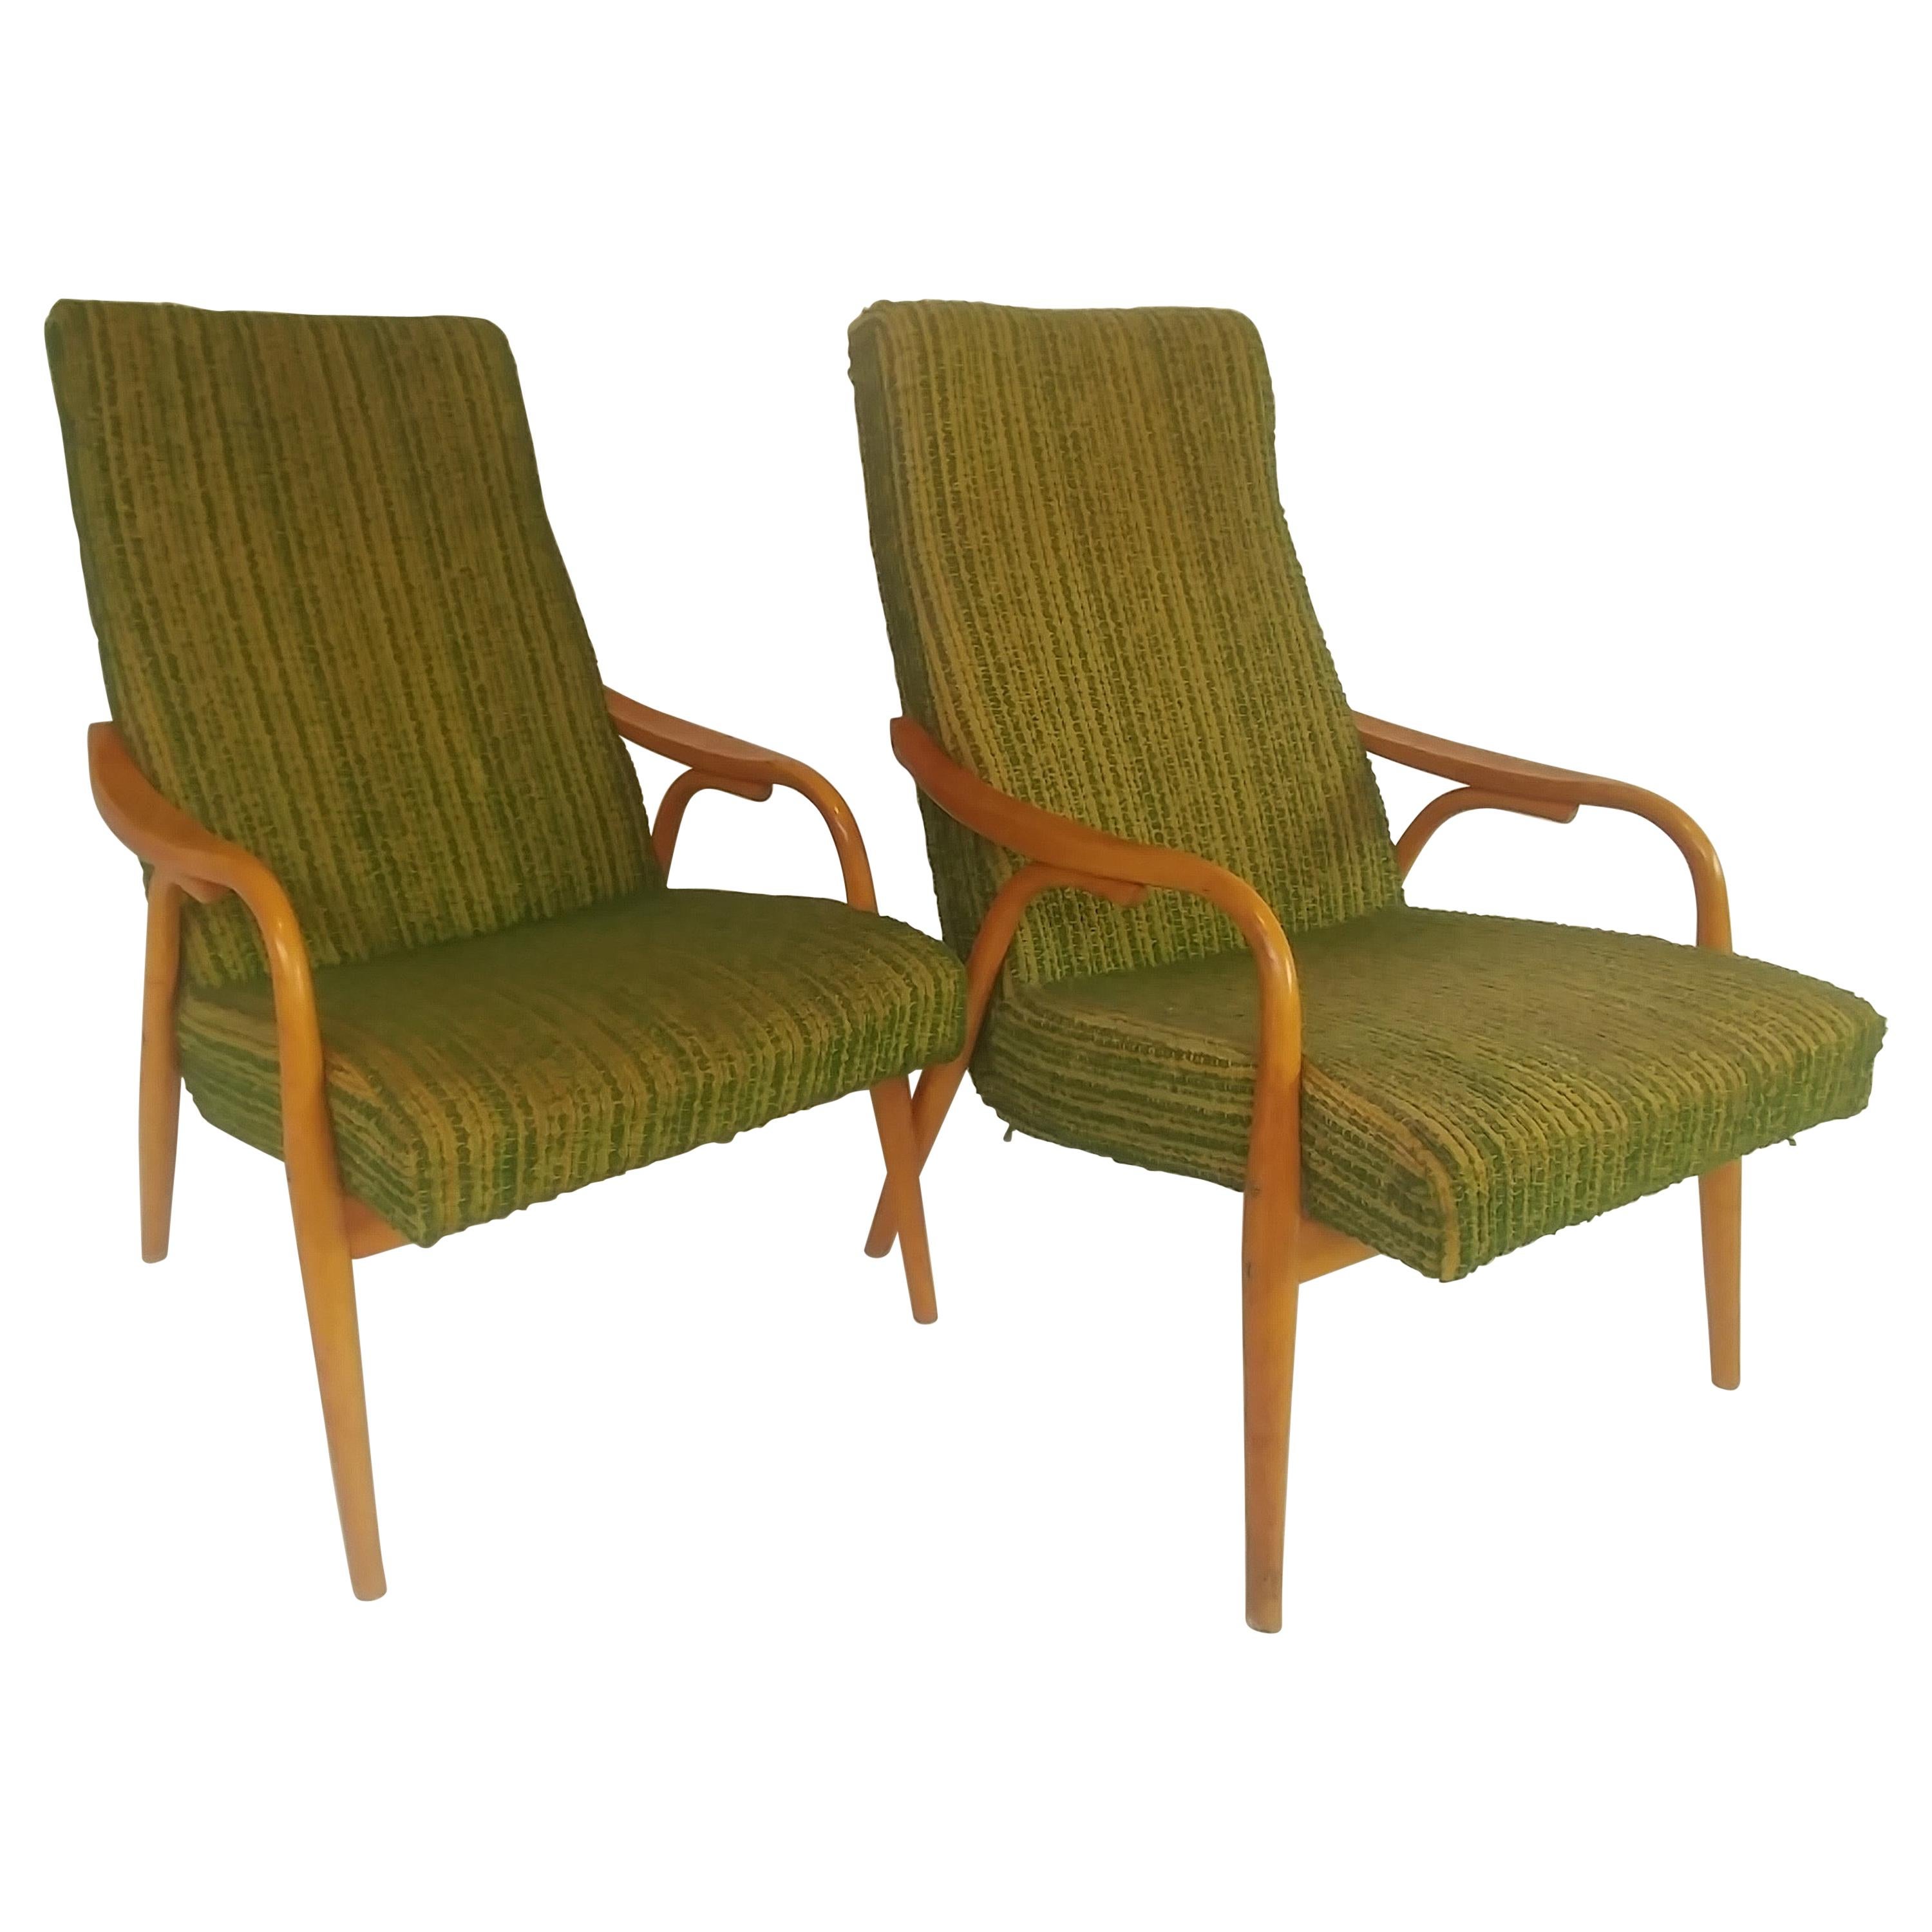 Two Design Armchair .